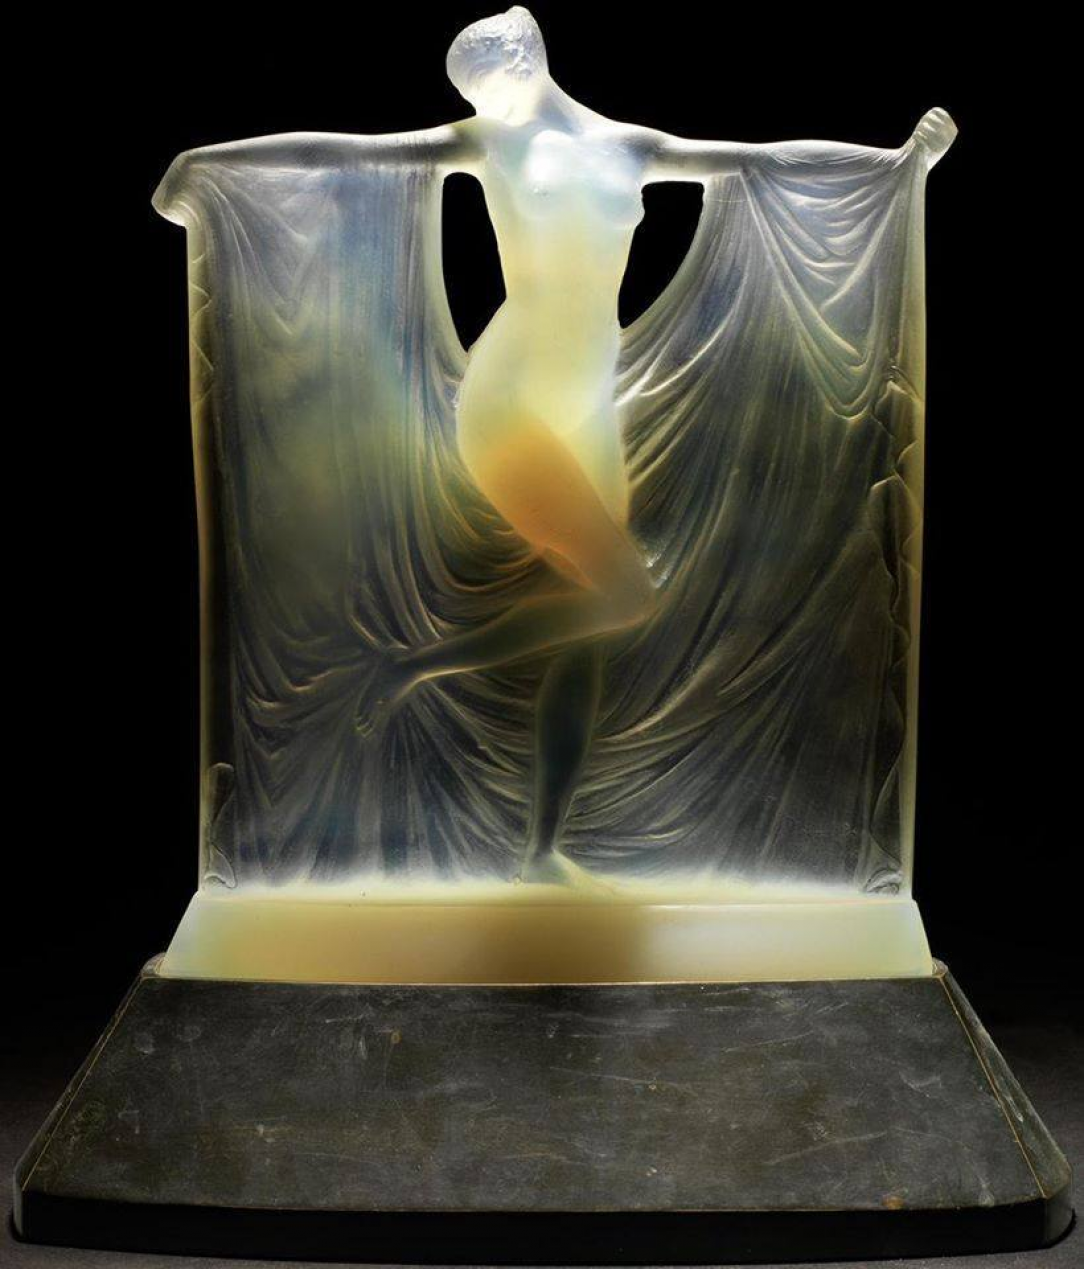 Opalescent Glass Statuette made in 1925 by Rene Lalique. It is 8¾ inches tall